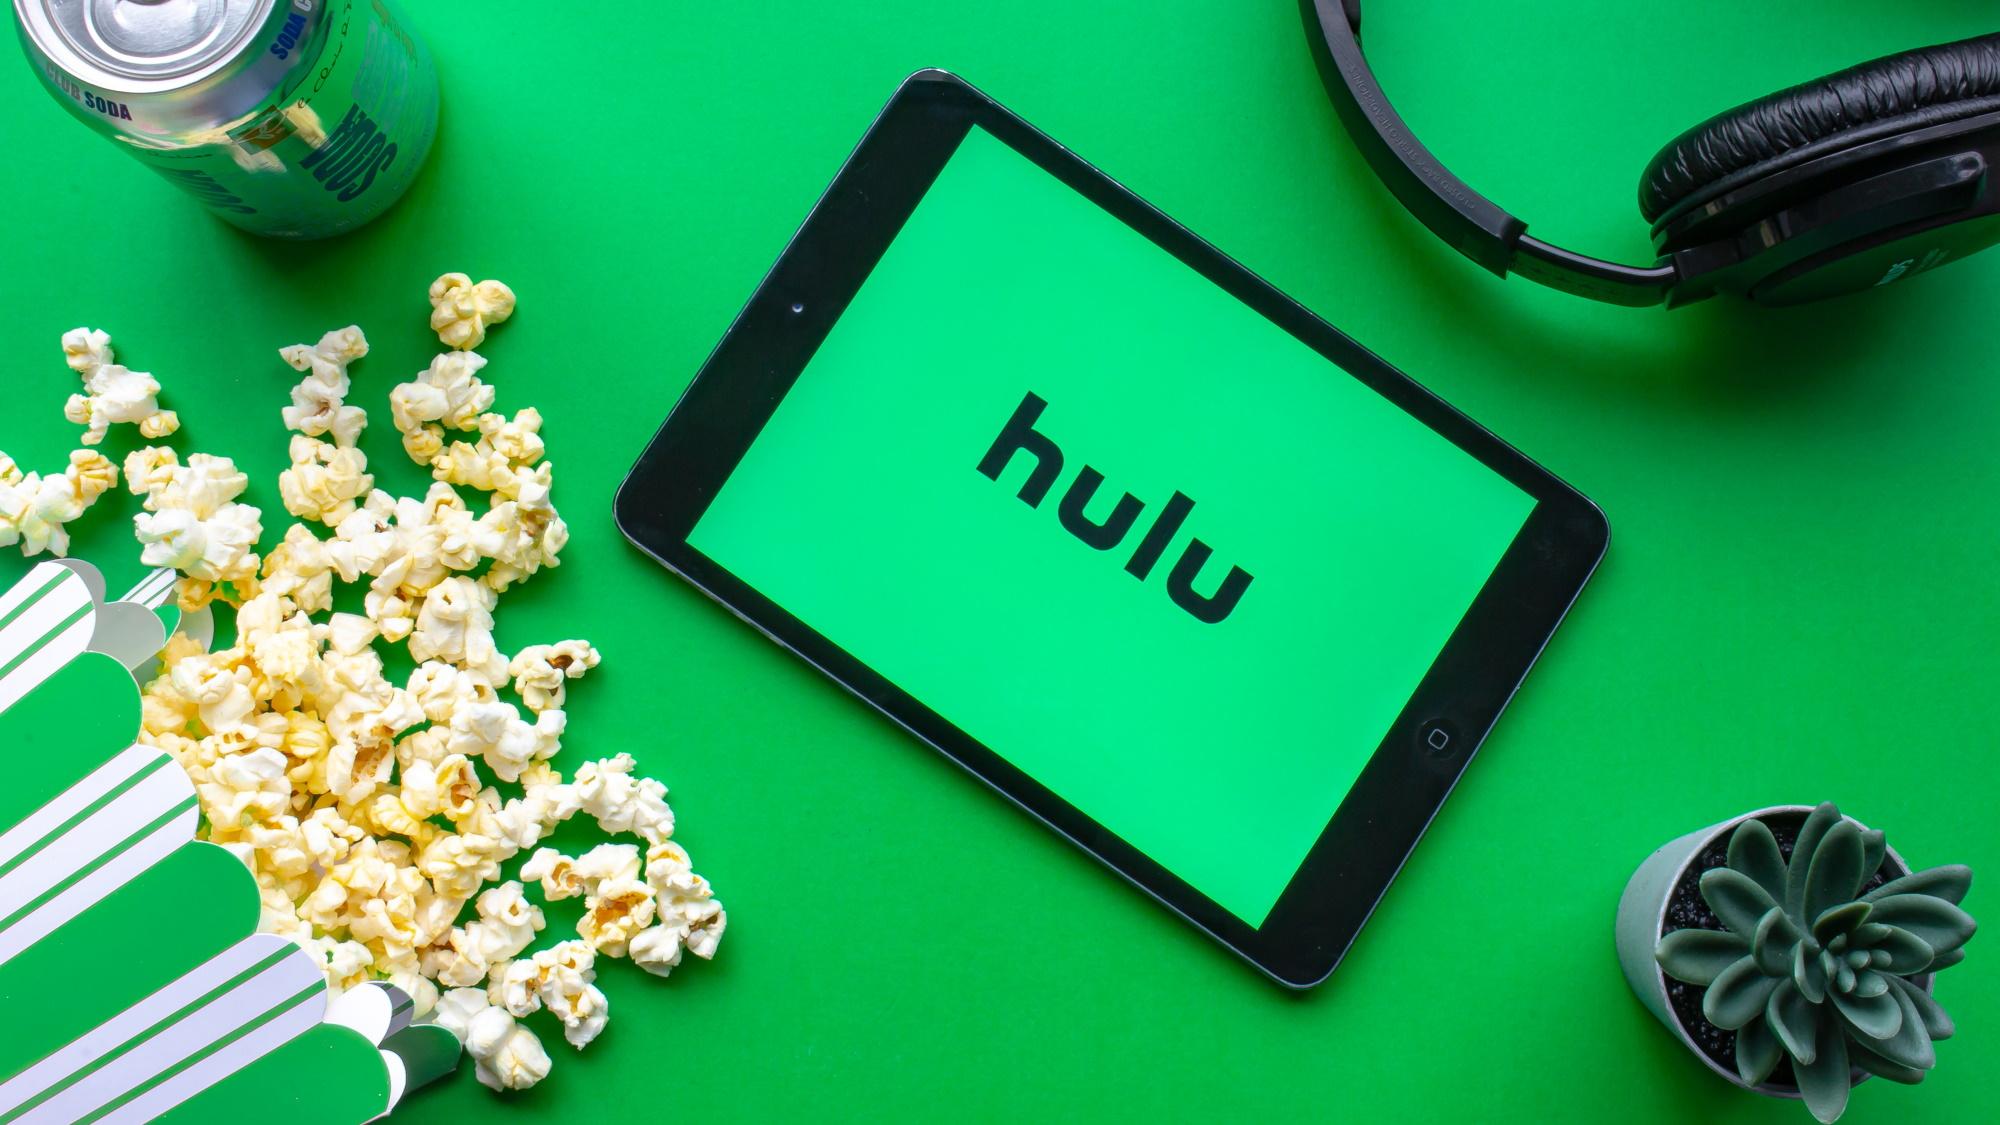 Hulu on an tablet, green background